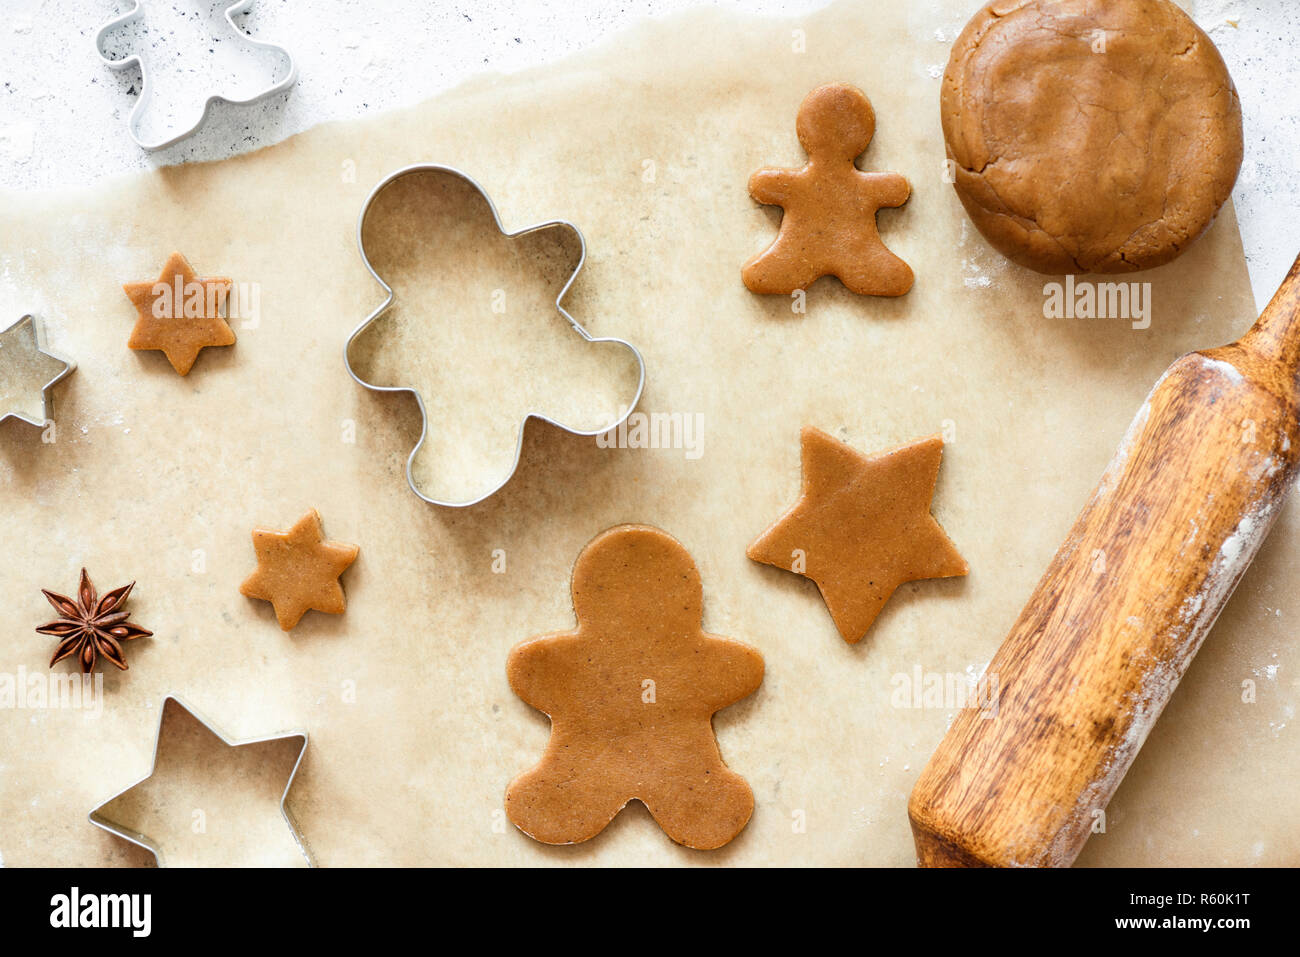 Gingerbread cookies on baking paper. Top view. Preparation of Christmas cookies. Holiday baking concept Stock Photo